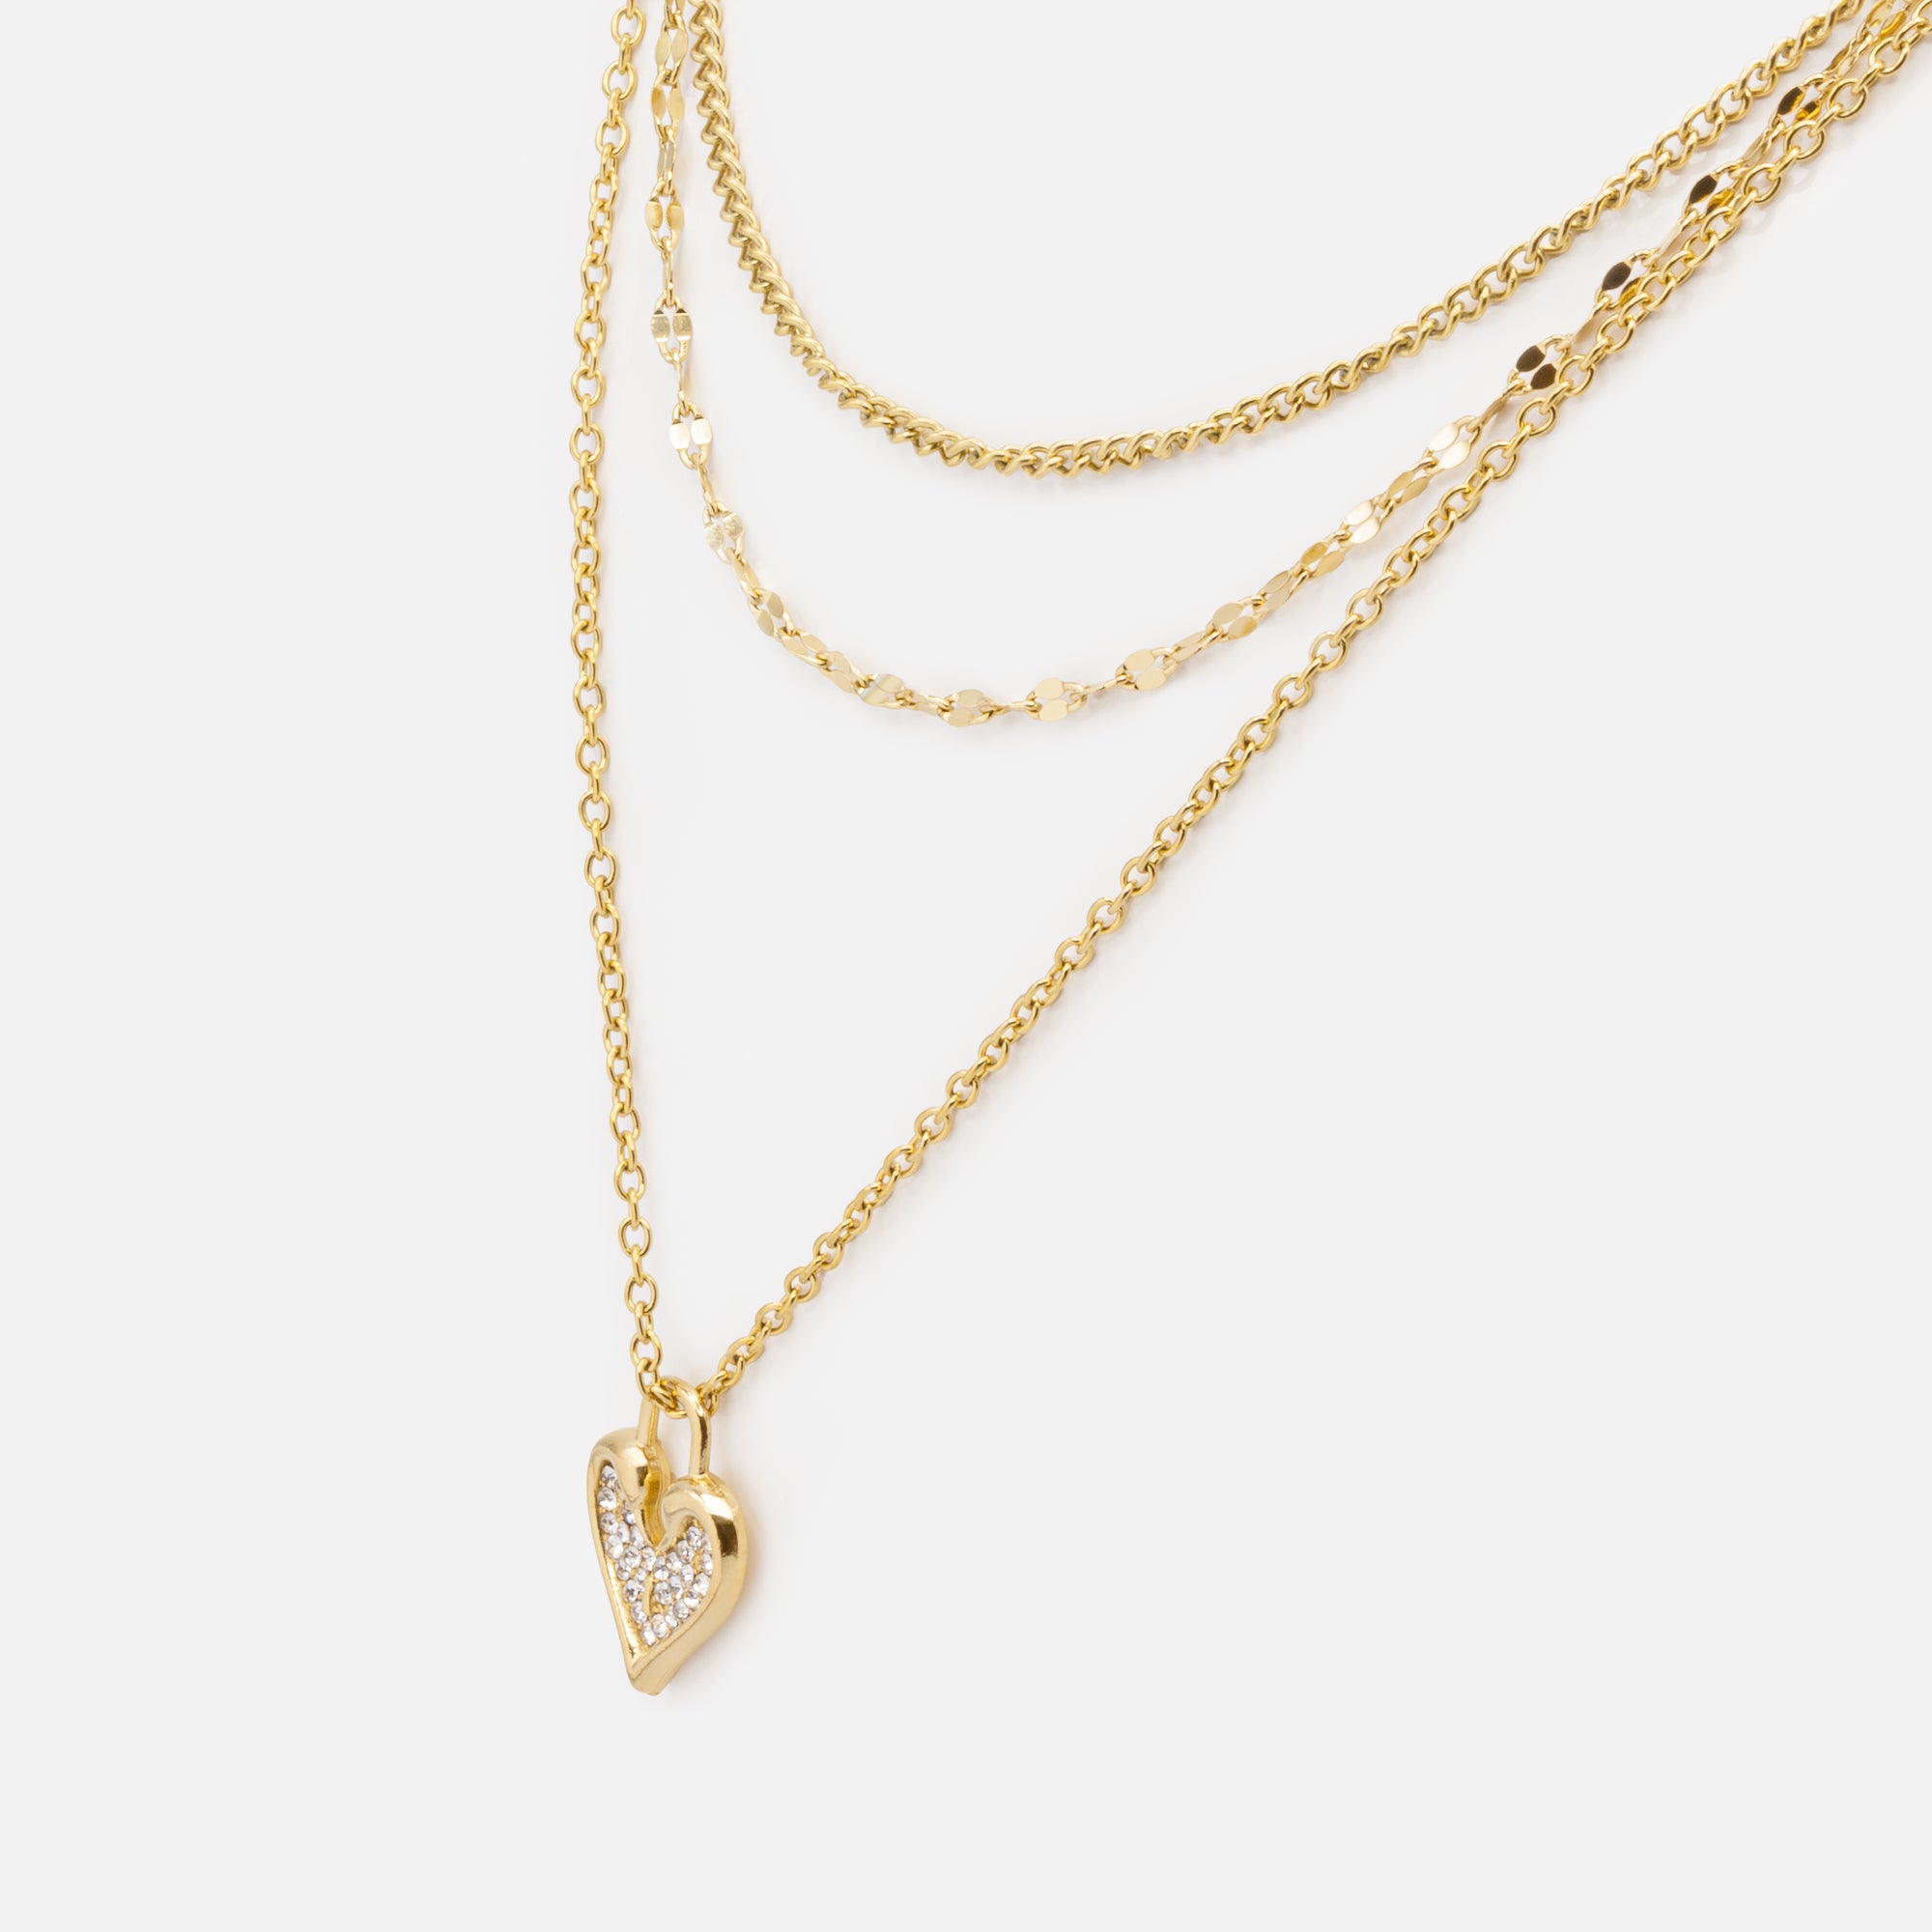 Gold set triple chain necklace with heart and double chain bracelet in stainless steel